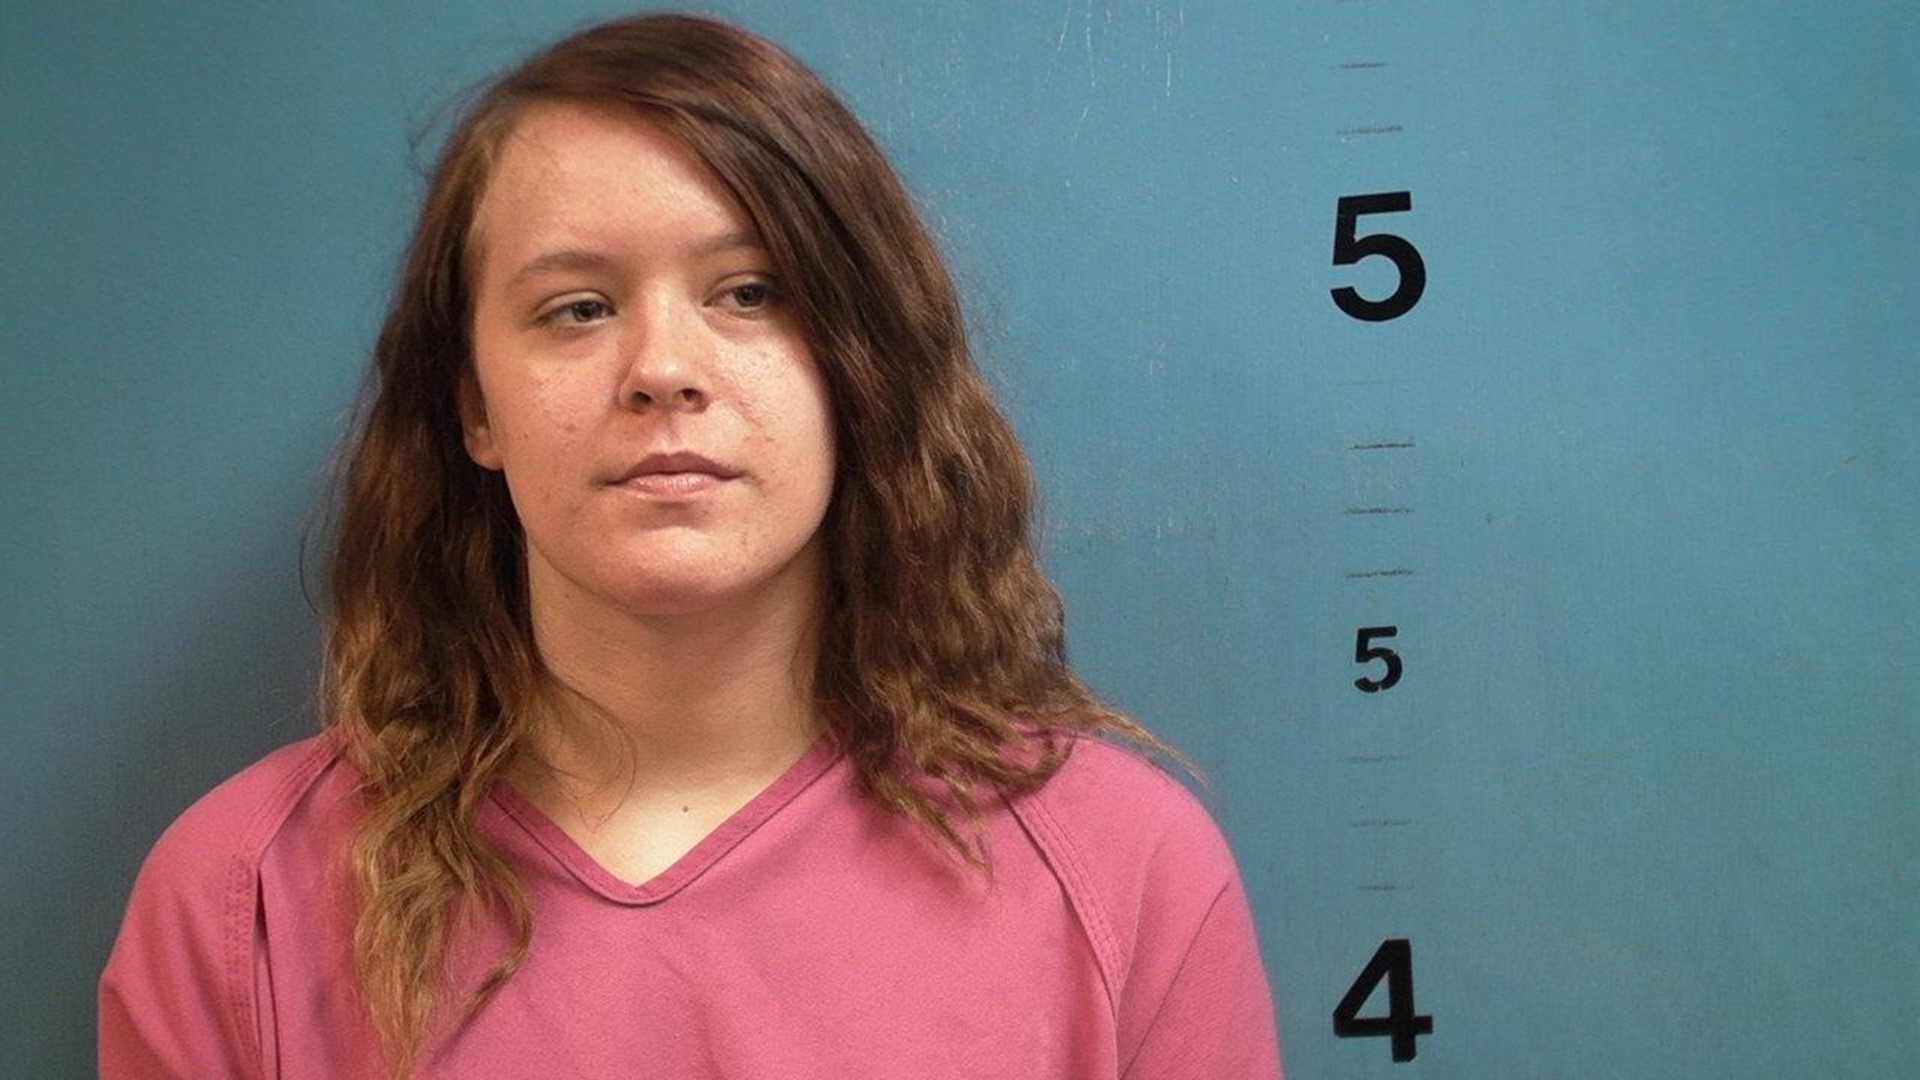 She entered her guilty plea at a hearing Wednesday morning, and was sentenced to life with the possibility of parole.